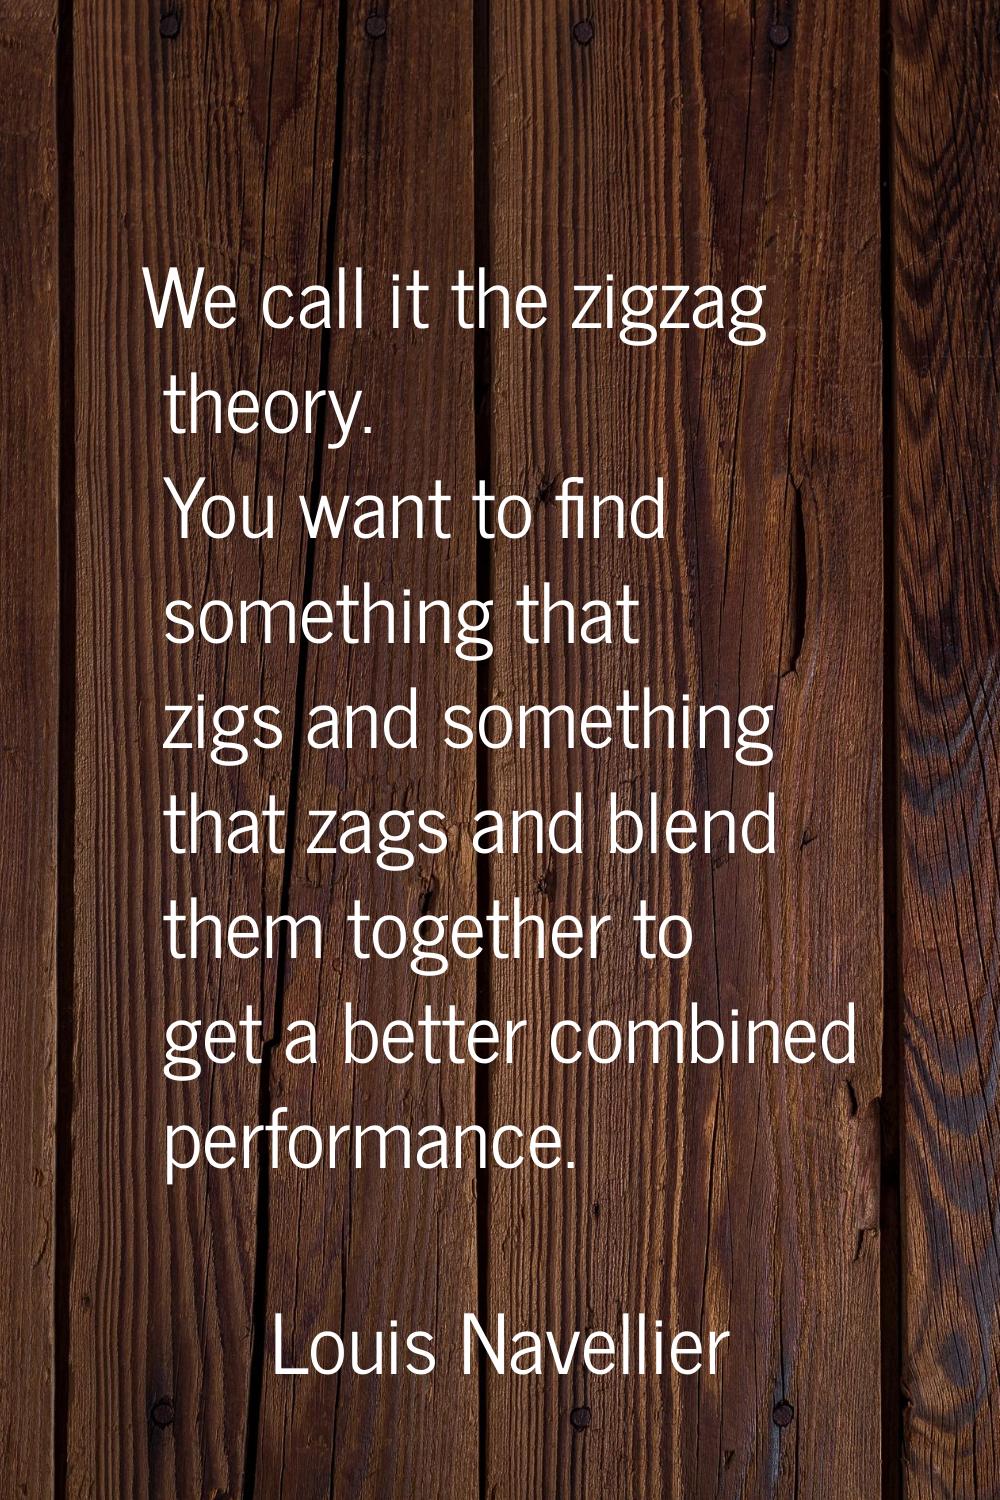 We call it the zigzag theory. You want to find something that zigs and something that zags and blen